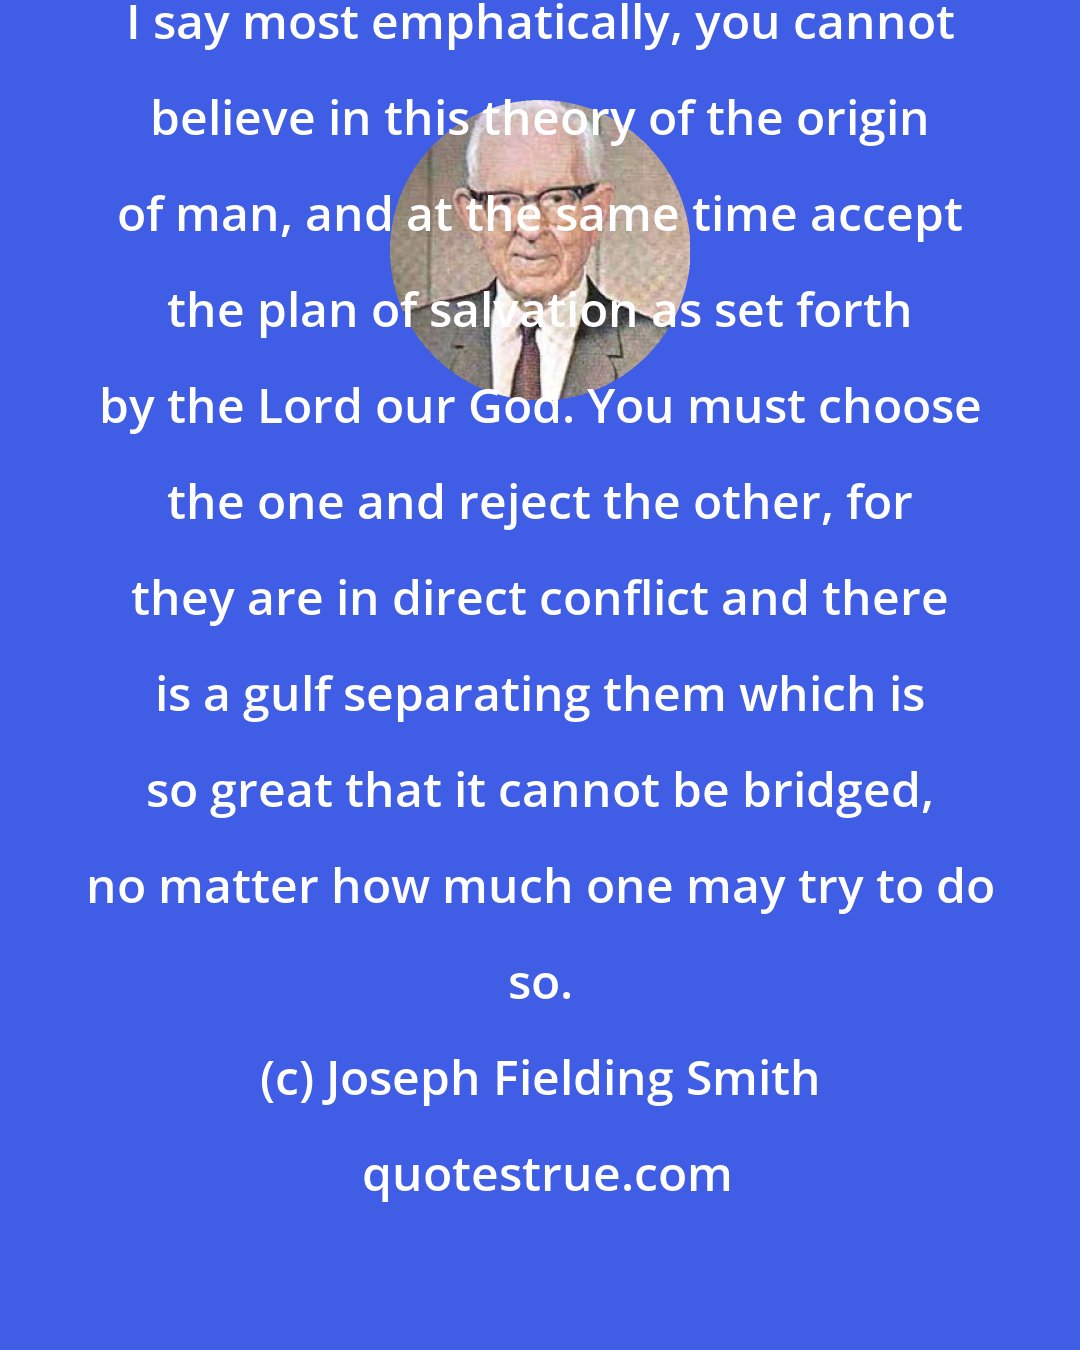 Joseph Fielding Smith: CANNOT BELIEVE BOTH GOSPEL AND EVOLUTION. I say most emphatically, you cannot believe in this theory of the origin of man, and at the same time accept the plan of salvation as set forth by the Lord our God. You must choose the one and reject the other, for they are in direct conflict and there is a gulf separating them which is so great that it cannot be bridged, no matter how much one may try to do so.